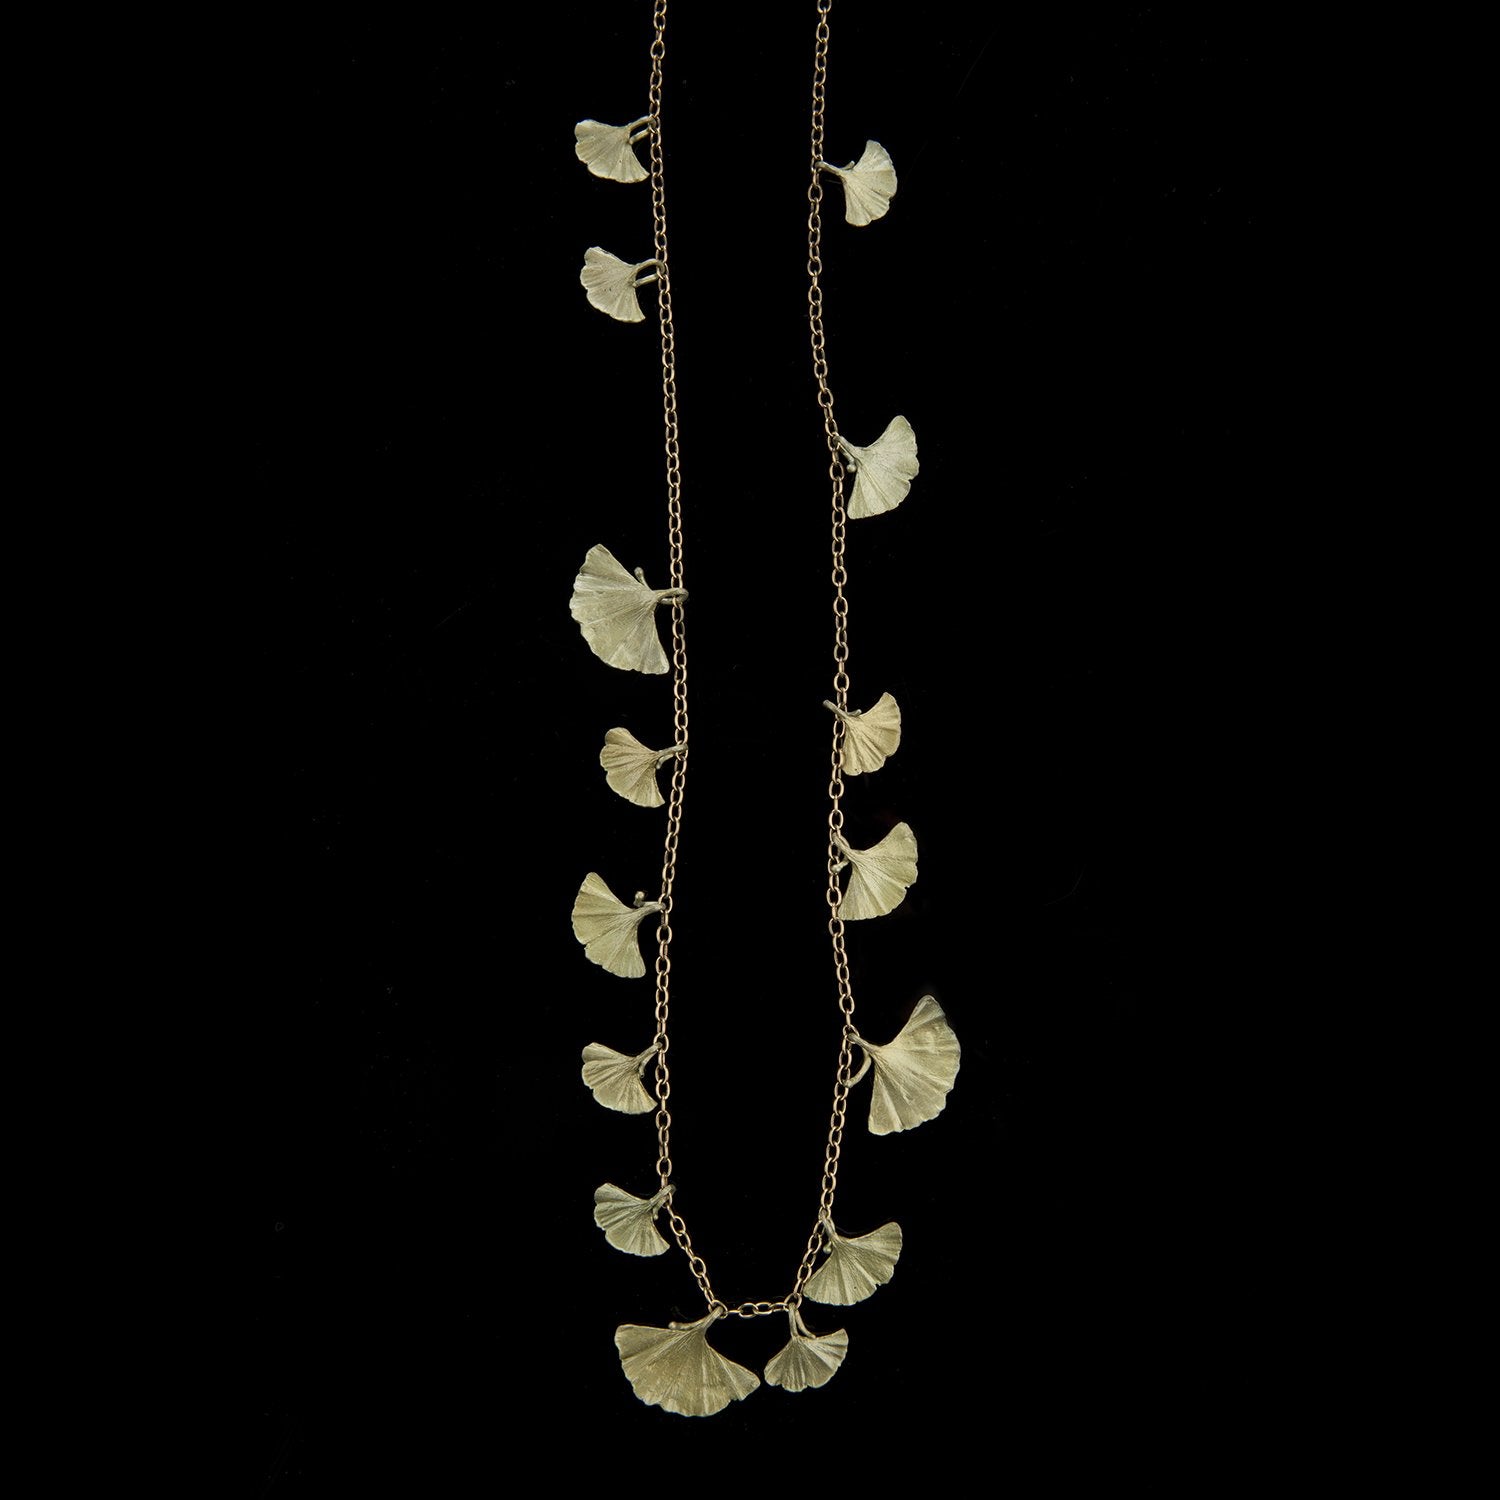 Ginkgo Necklace - Long